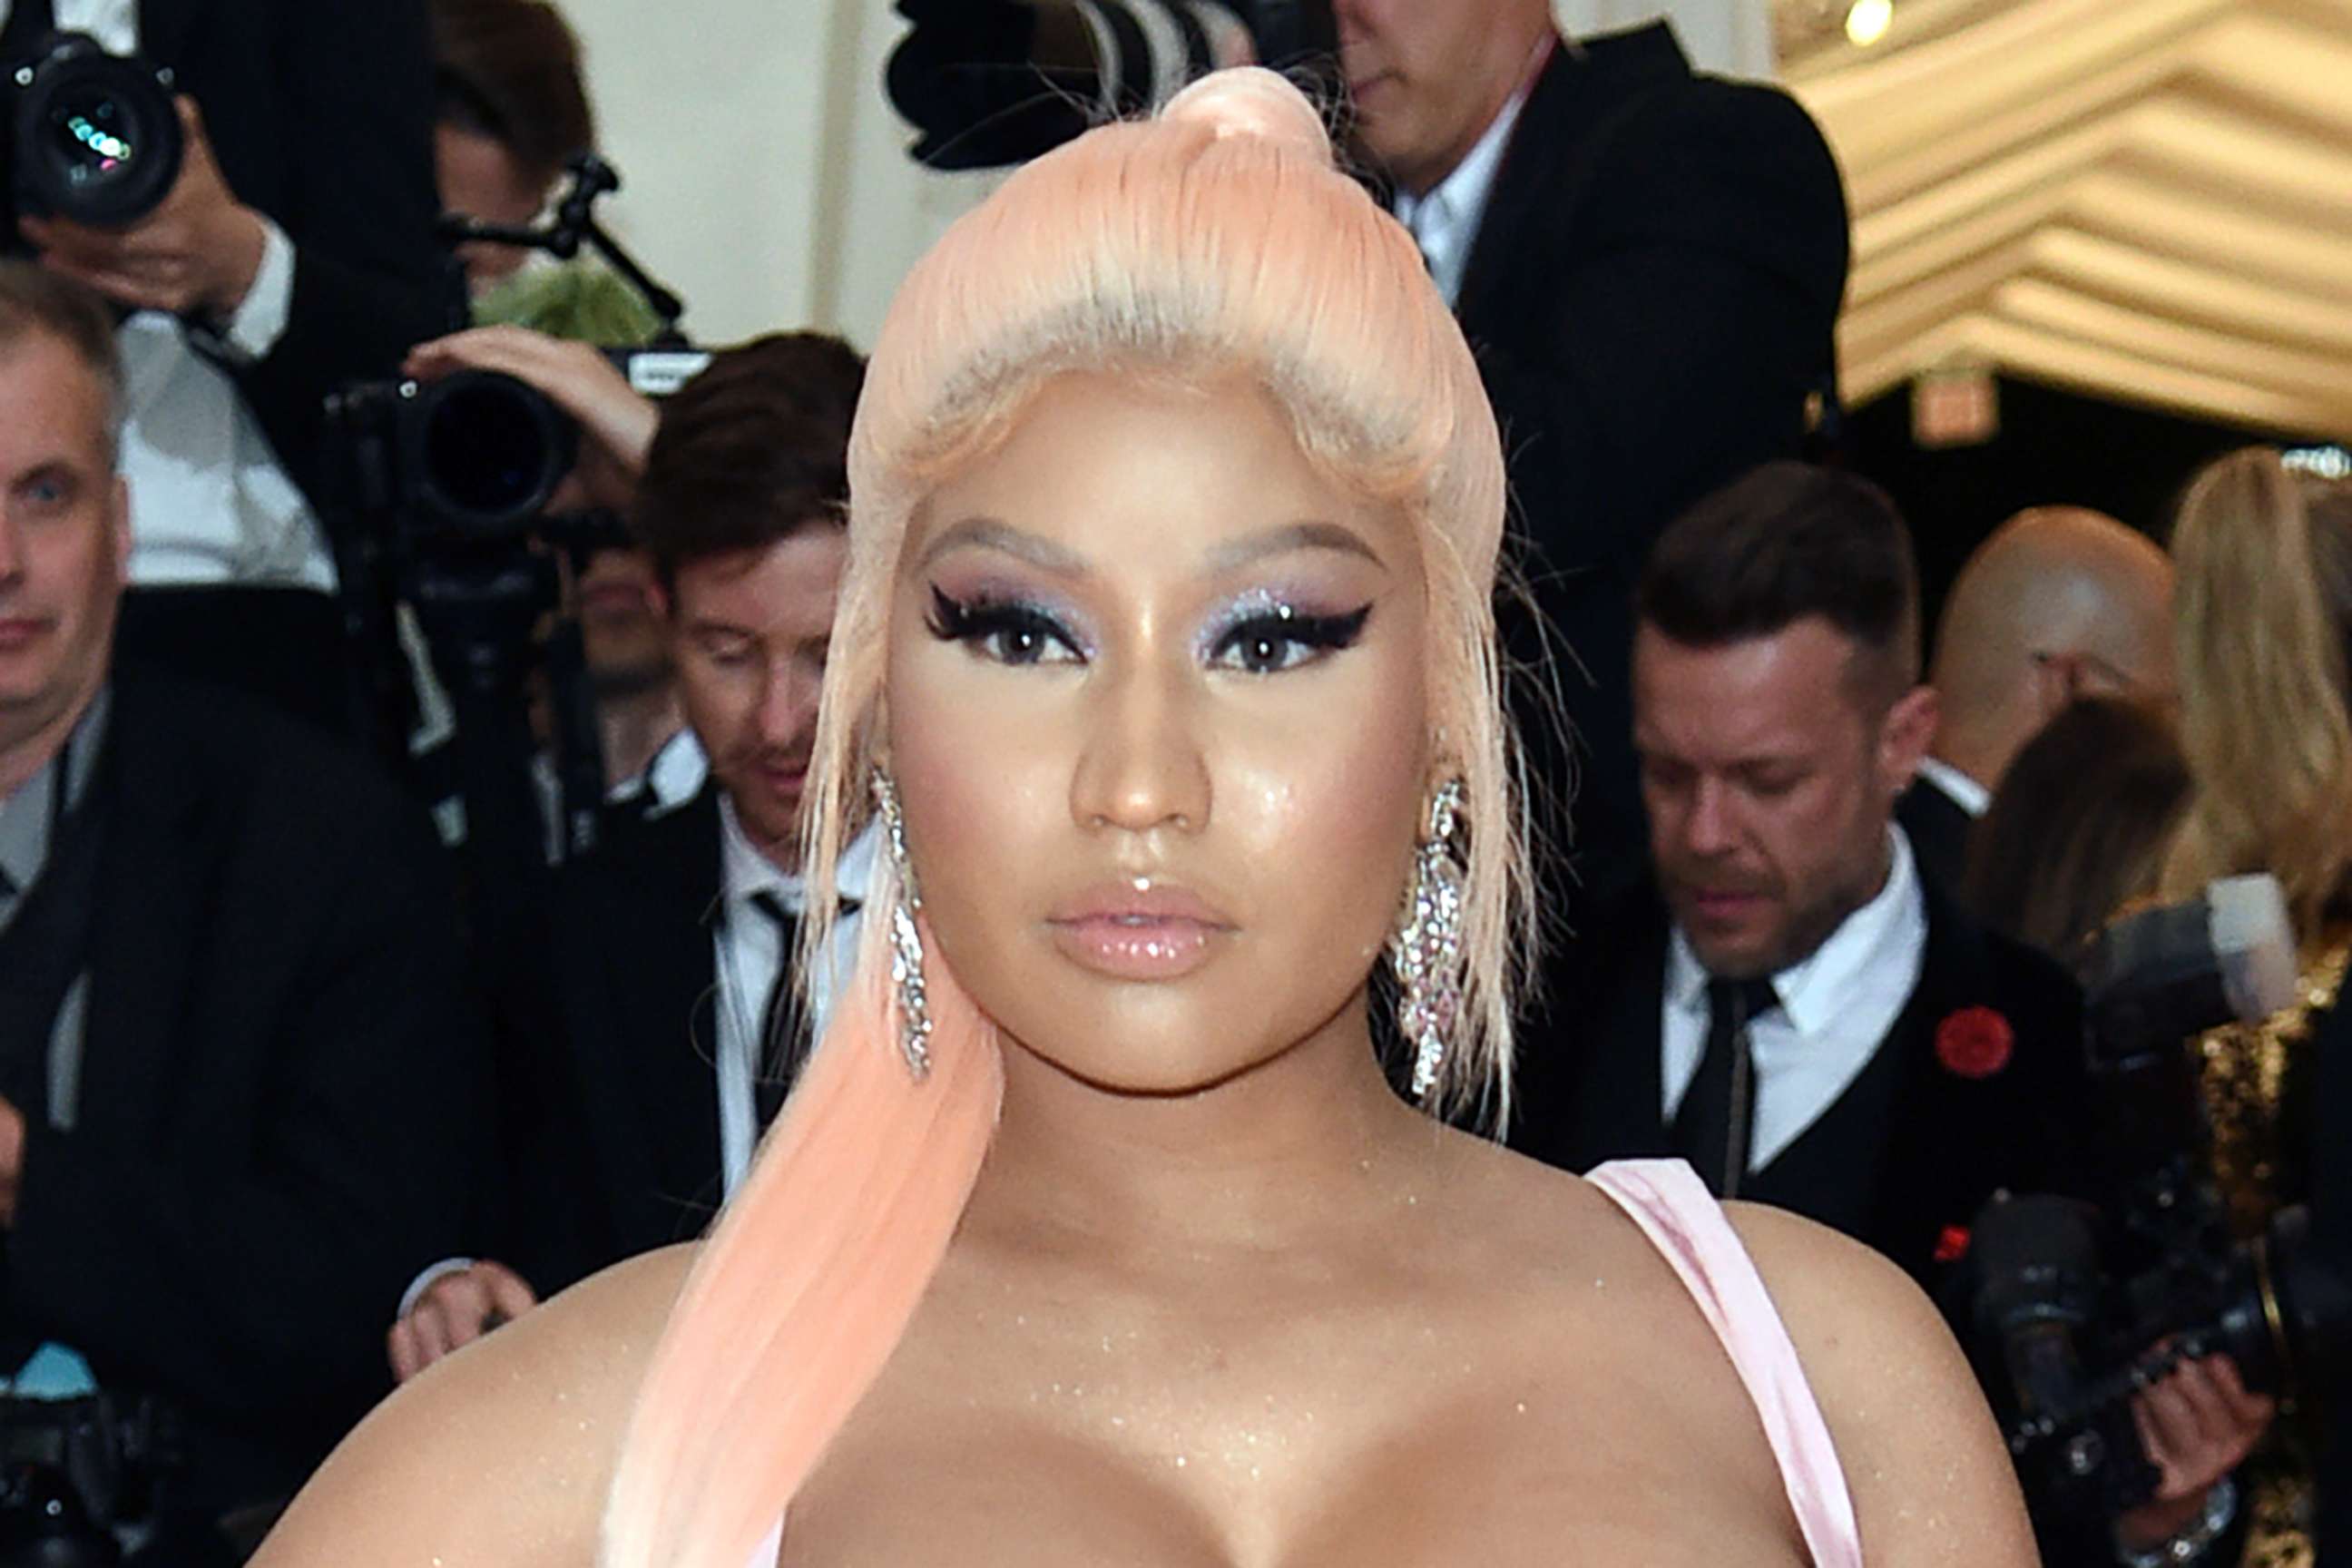 PHOTO: Nicki Minaj attends The Metropolitan Museum of Art's Costume Institute benefit gala, also known as The Met Gala, in New York City on May 6, 2019.